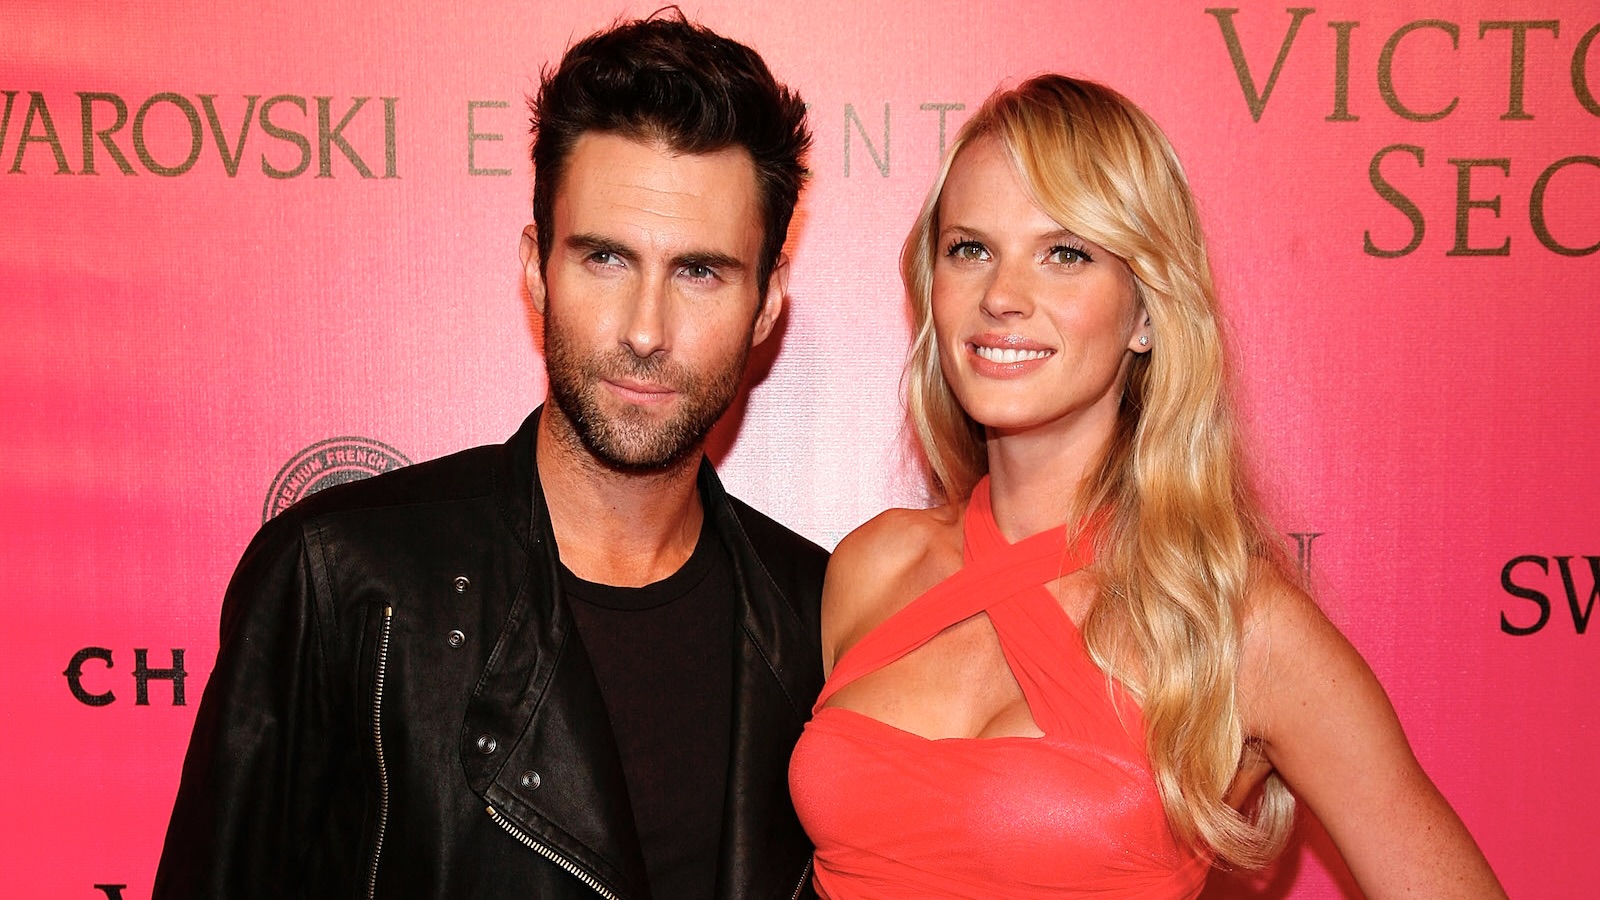 Adam Levine and Anne Vyalitsyna 2011 Victoria's Secret Fashion Show After Party at Dream Downtown on November 9, 2011 in New York City.